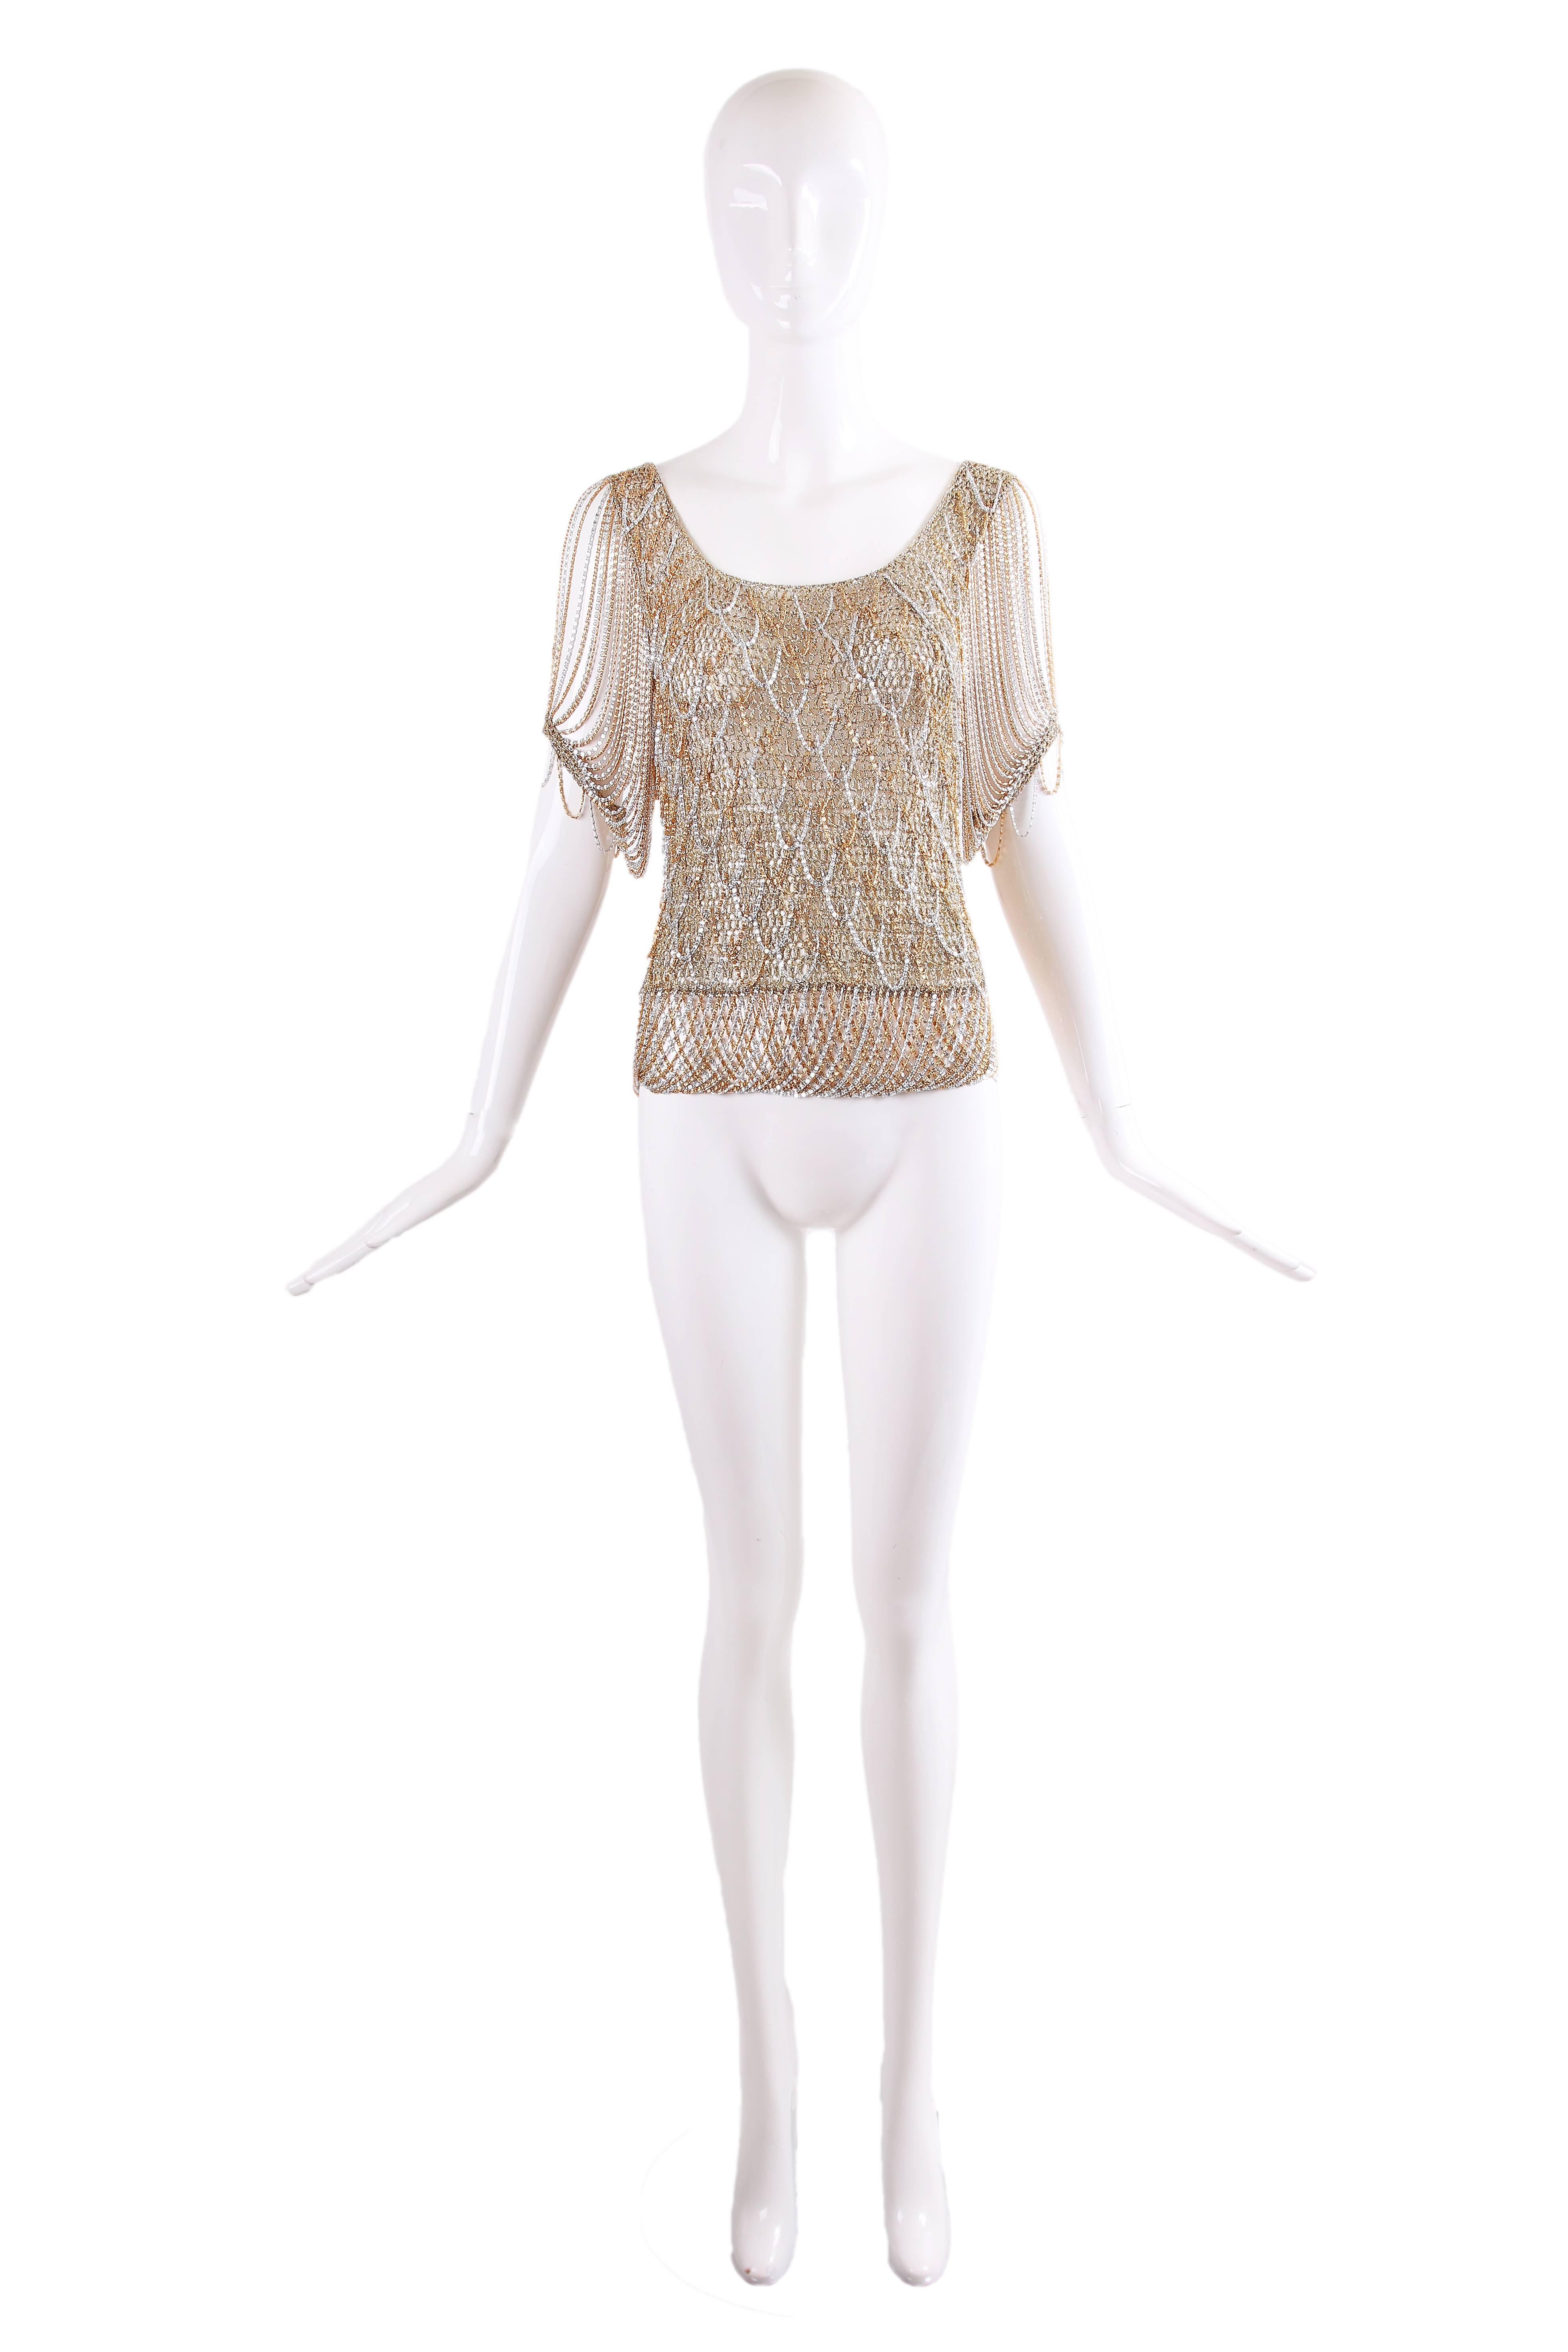 1970's Loris Azzaro gold and silver knit lurex top with chain fringe at sleeves, hem and knit into the lurex at the bodice. In excellent condition - no size tag, please consult measurements.